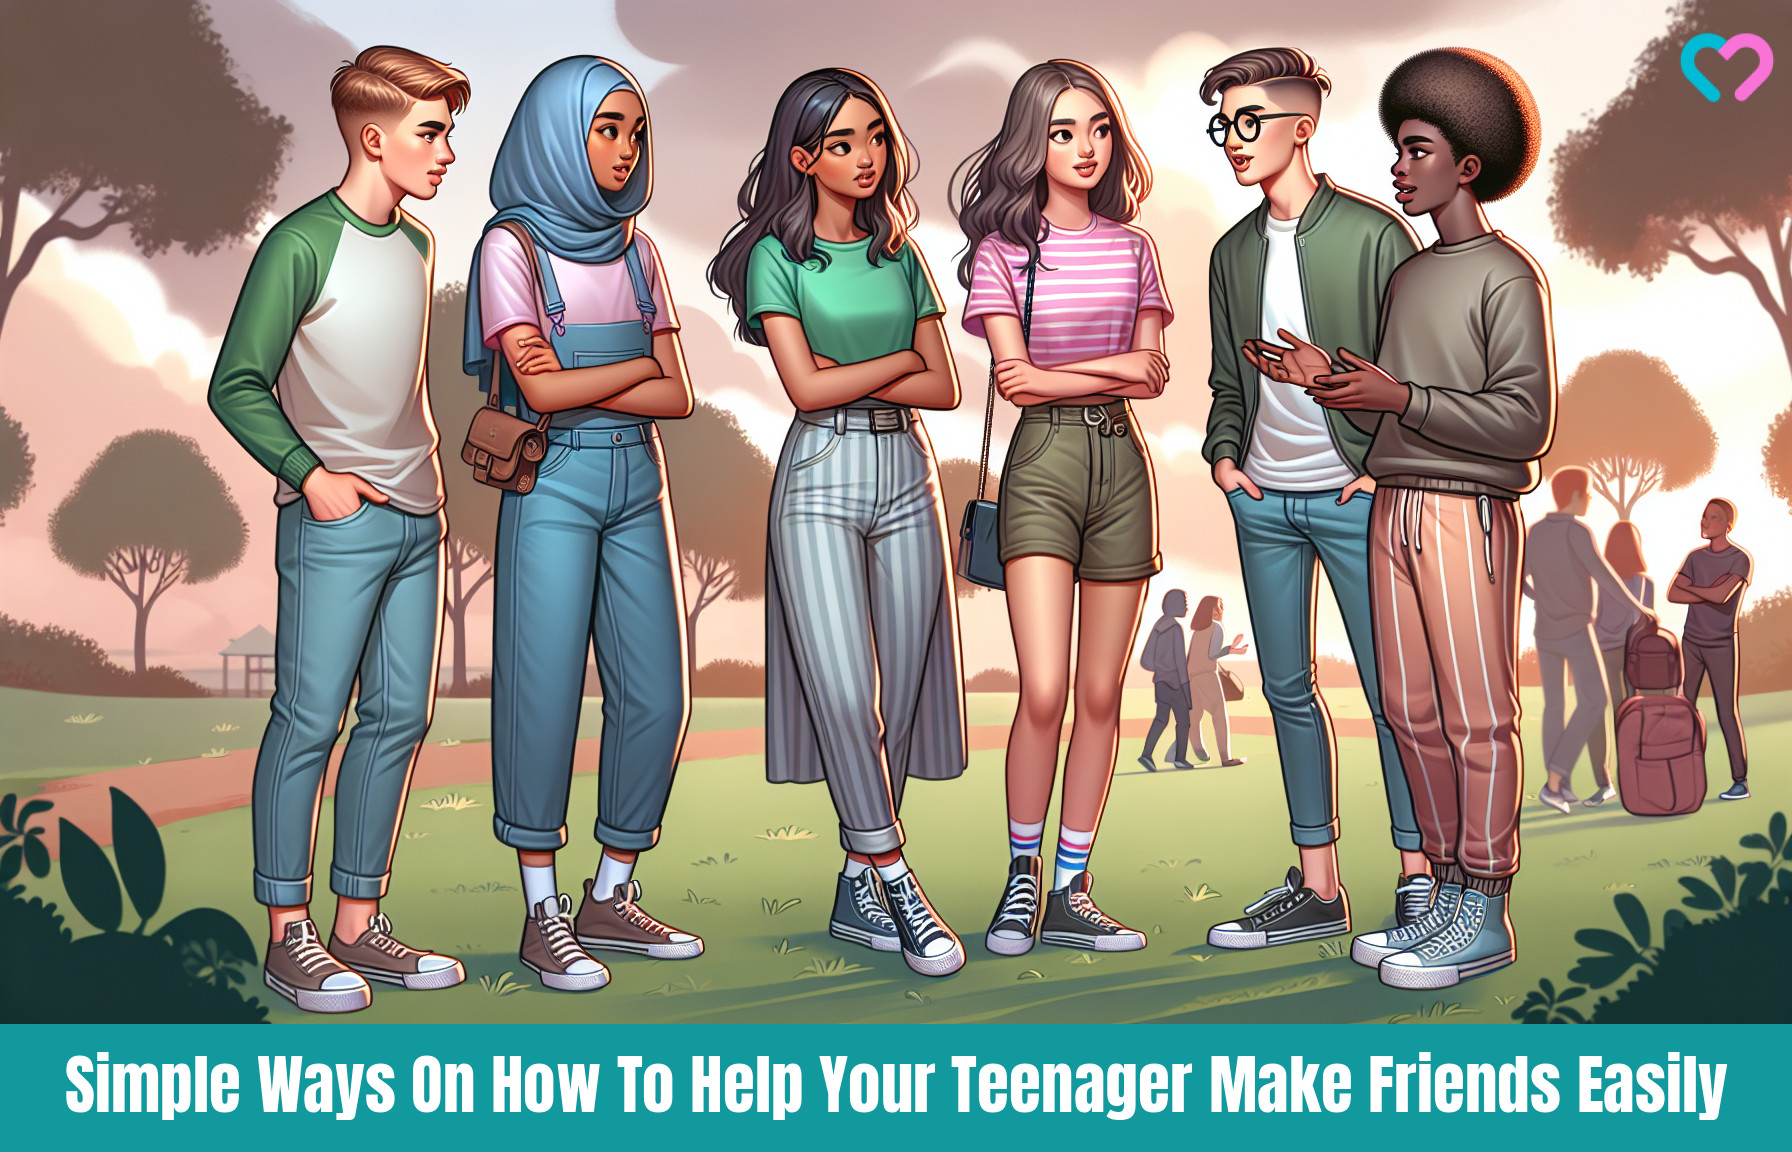 How To Help Your Teenager Make Friends Easily_illustration